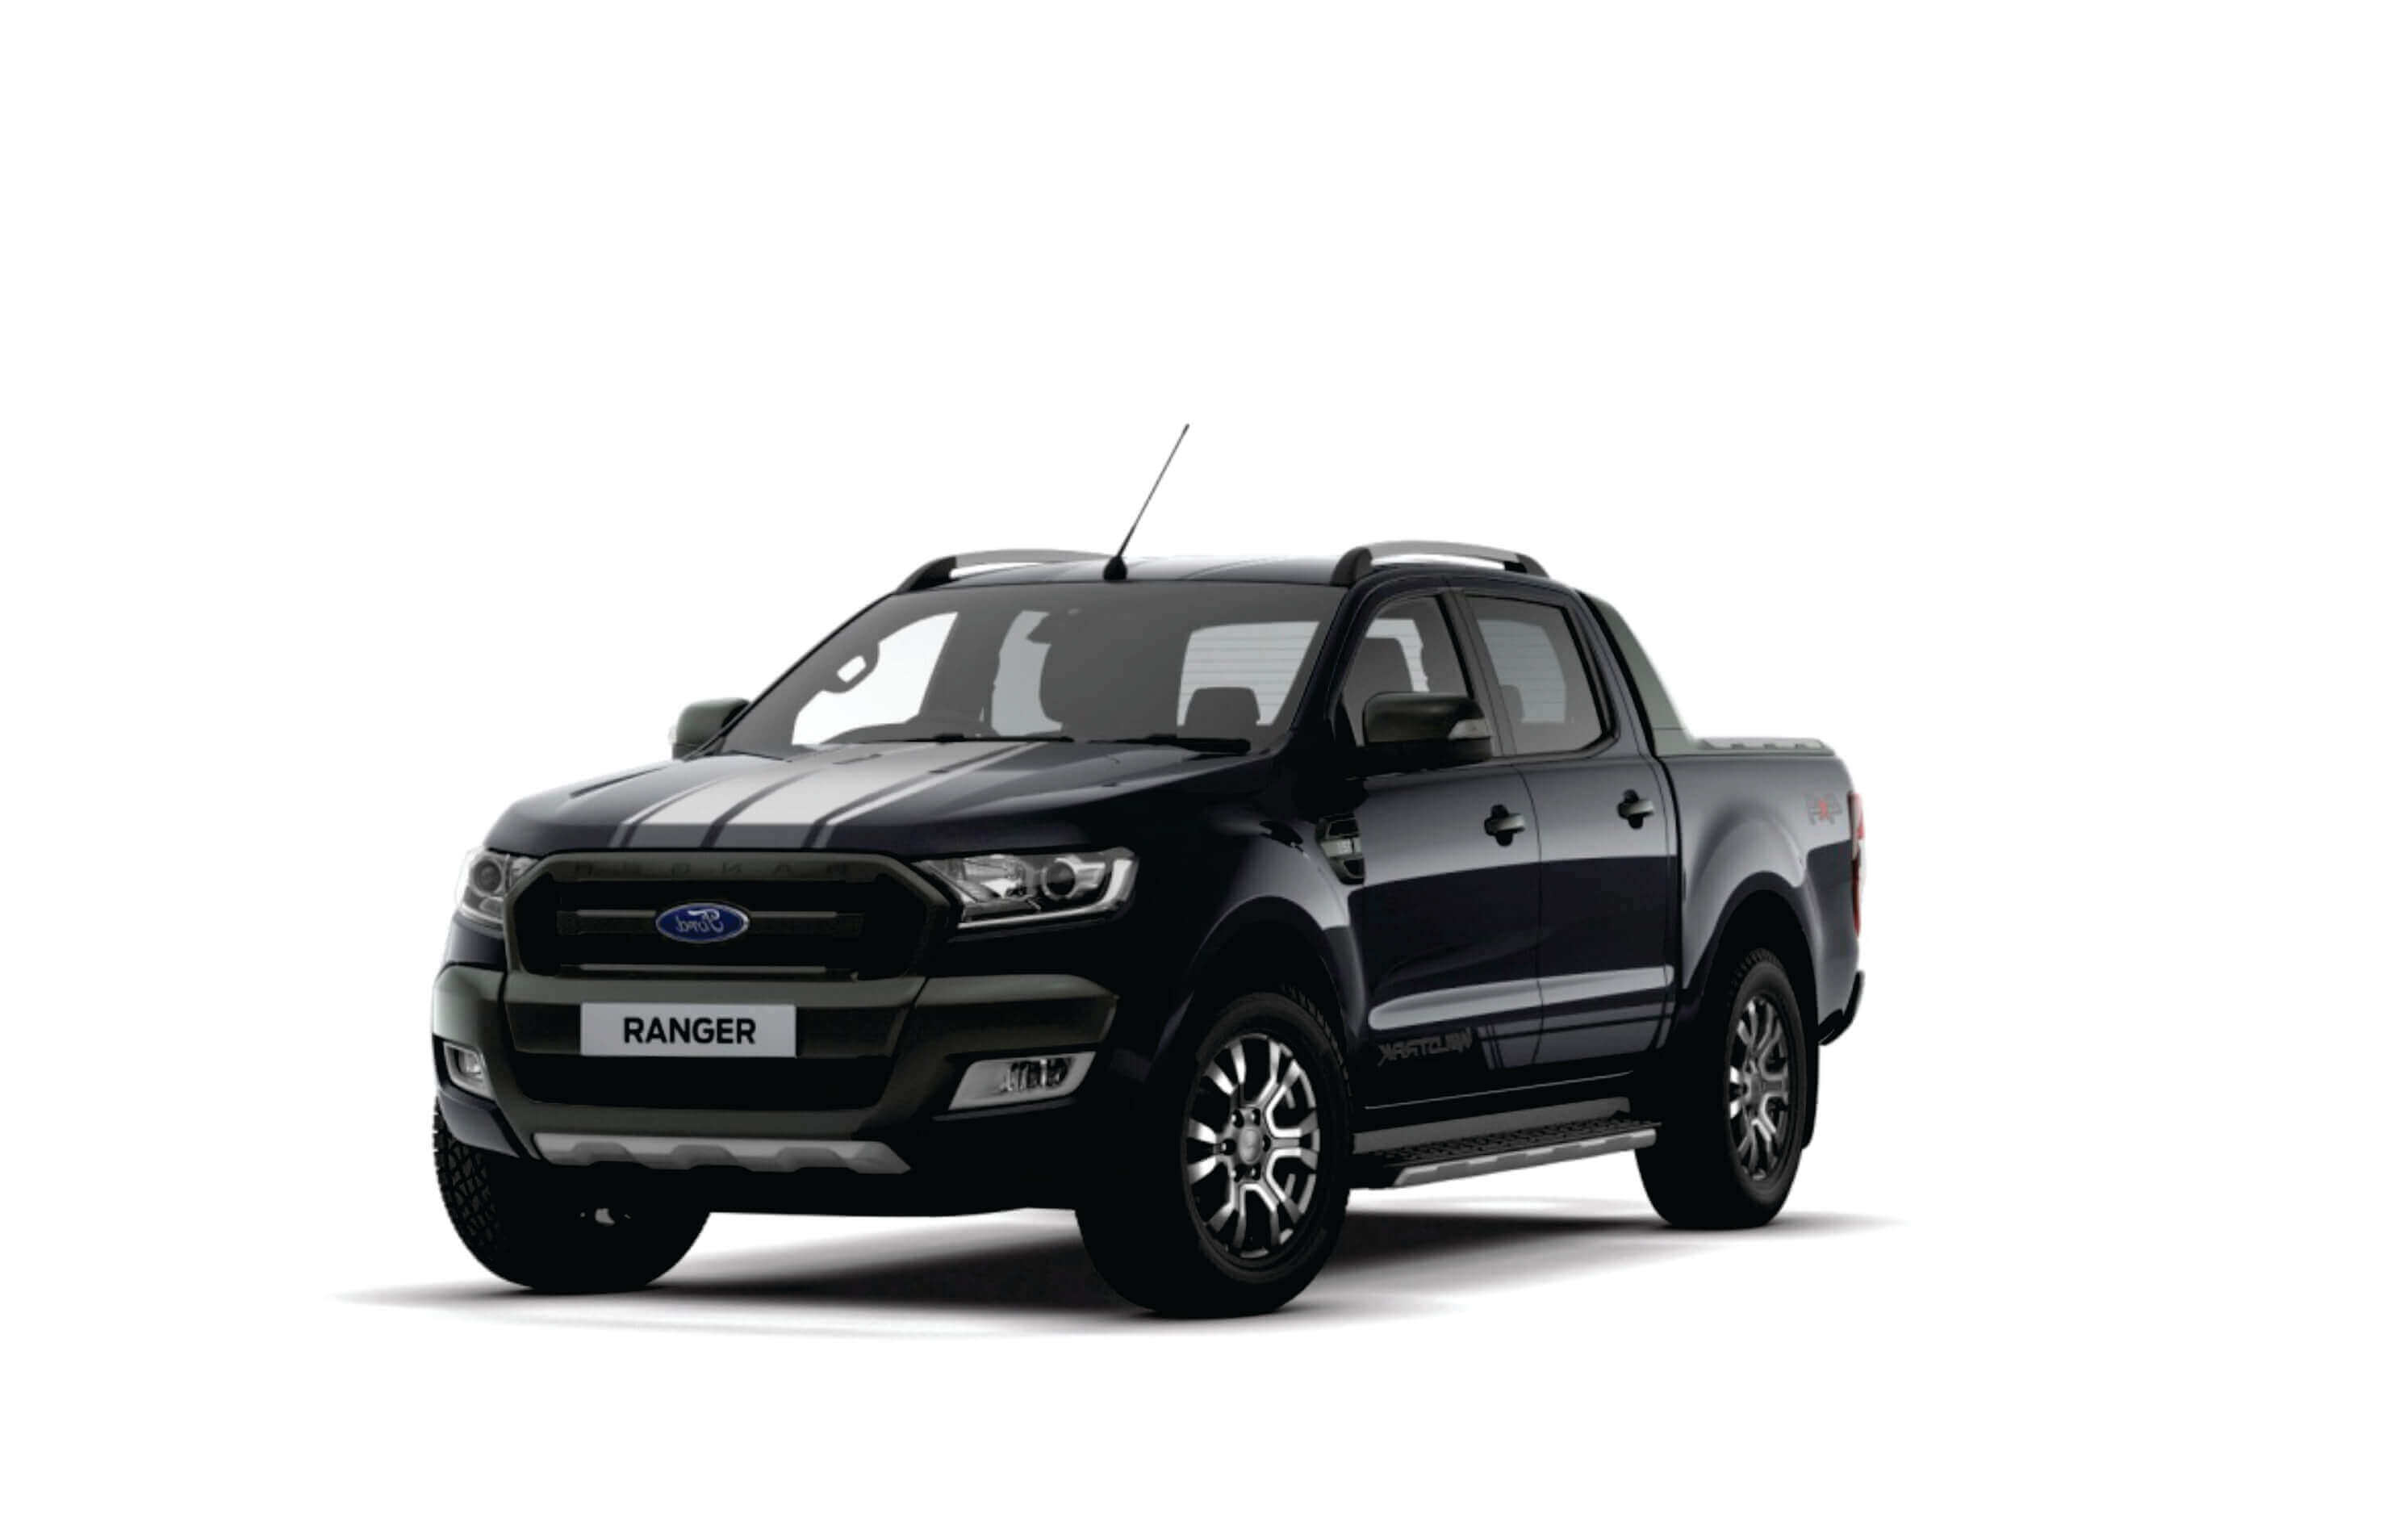 2016 Ford Ranger Wildtrak review  CarAdvice  YouTube